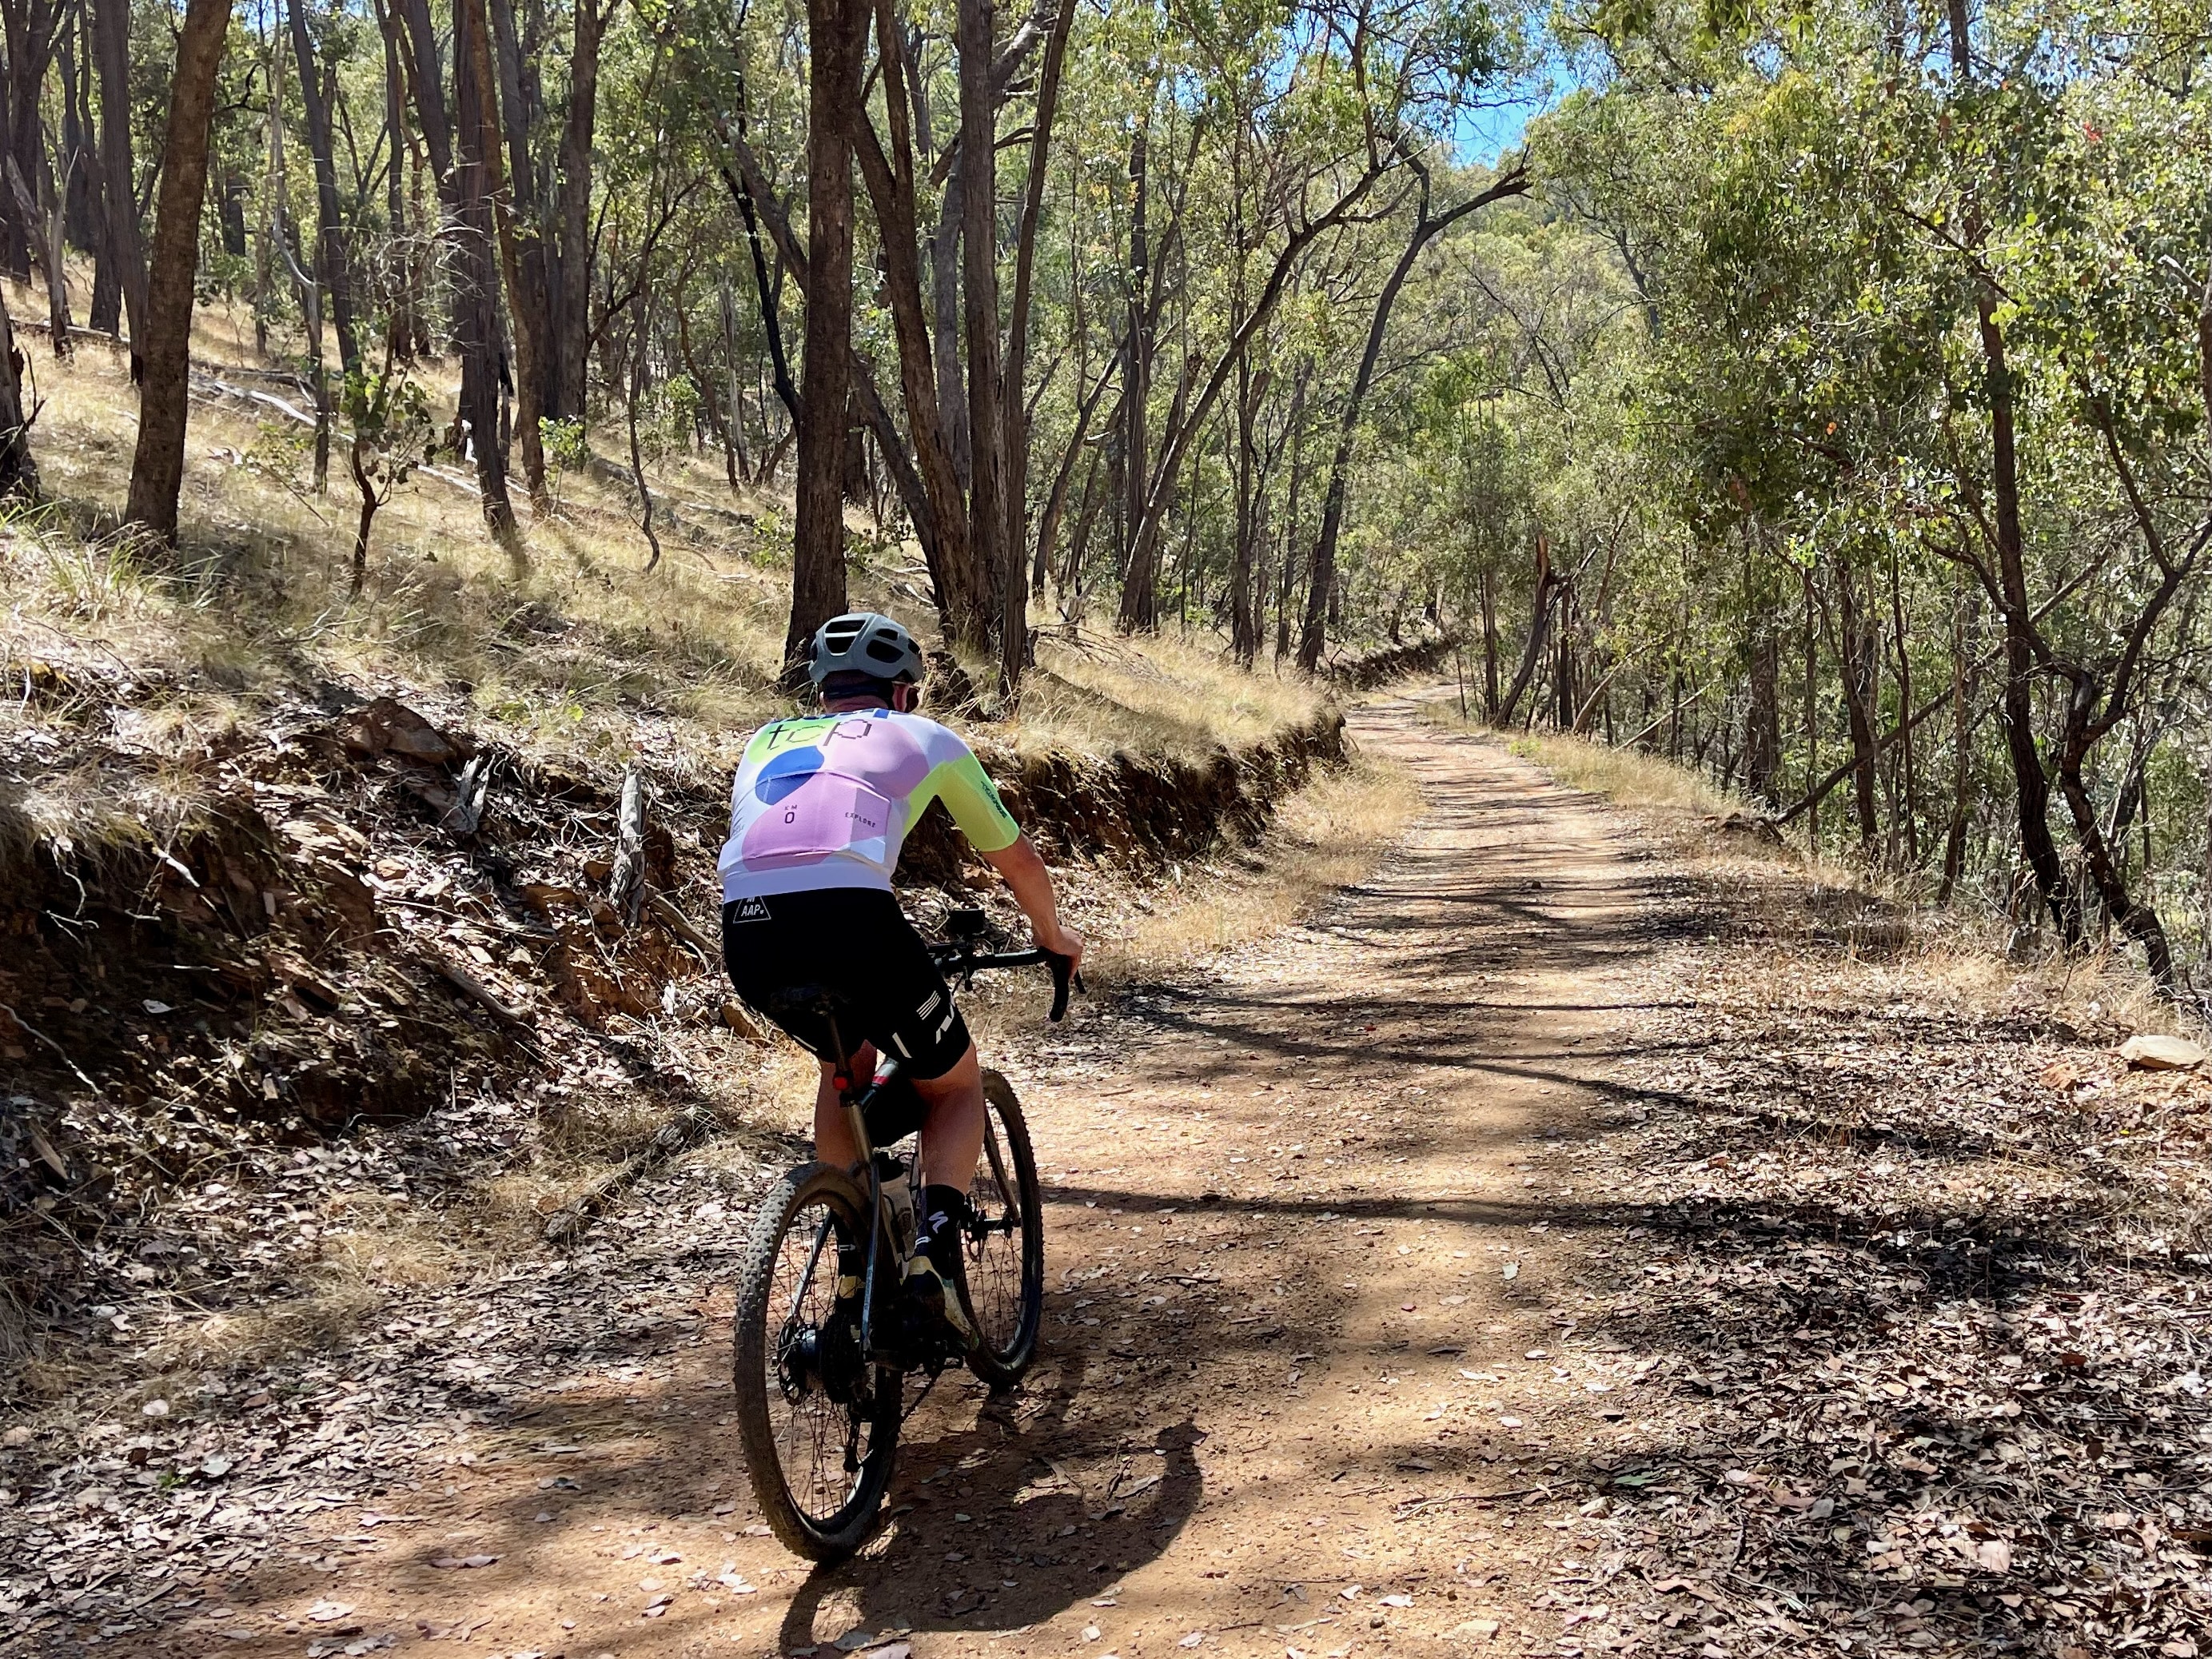 Cyclist riding on a dirt road winding up through the native bushland